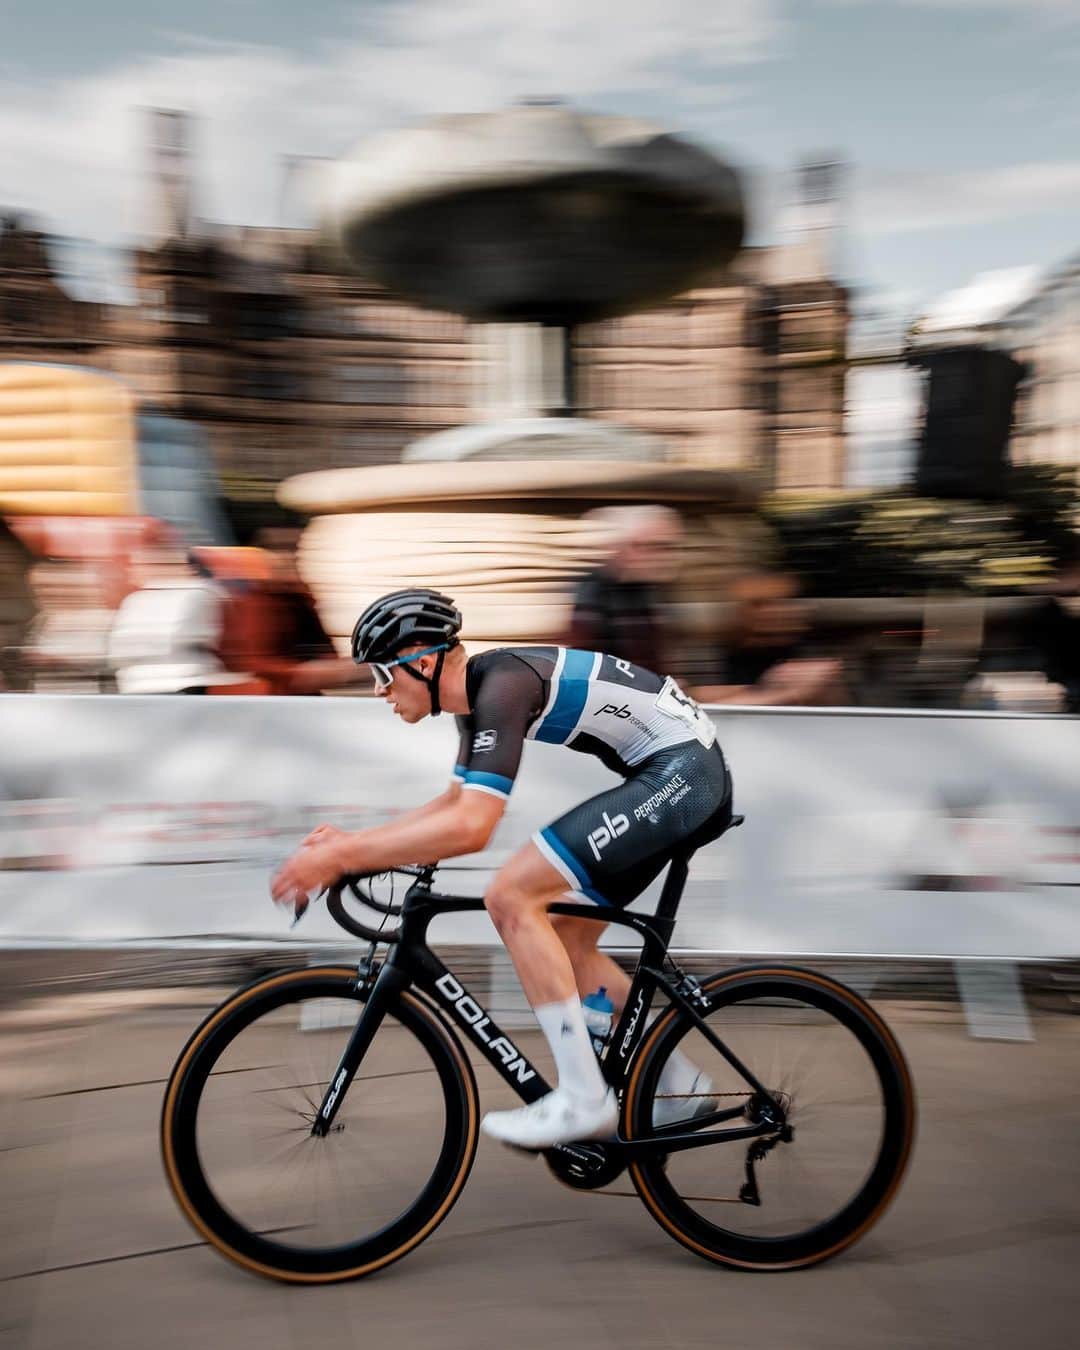 Fujifilm UKのインスタグラム：「Cycling in action 🚴   "Taken at one of British Cycling's grassroots events in Sheffield, UK. Competitors race around a short and narrow course comprising of city pavements, roads, and old cobble streets to get to the front of the pack and lap slower racers.  "The busy crowds and narrow nature of the course meant composition options were limited when shooting the event, so I decided a more creative approach would suit the subject better, shooting with a wider lens at 1/60 while panning with the rider to keep him sharp in the centre of the frame while blurring the motion of the background.   The aim was to give the viewer of my image a better feeling of what it was like to see the riders blaze past in such confined space."   📸: @ipsmith   #FUJIFILMXT3 XF16mmF2.8 R WR f/11, ISO 160, 1/60 sec.」